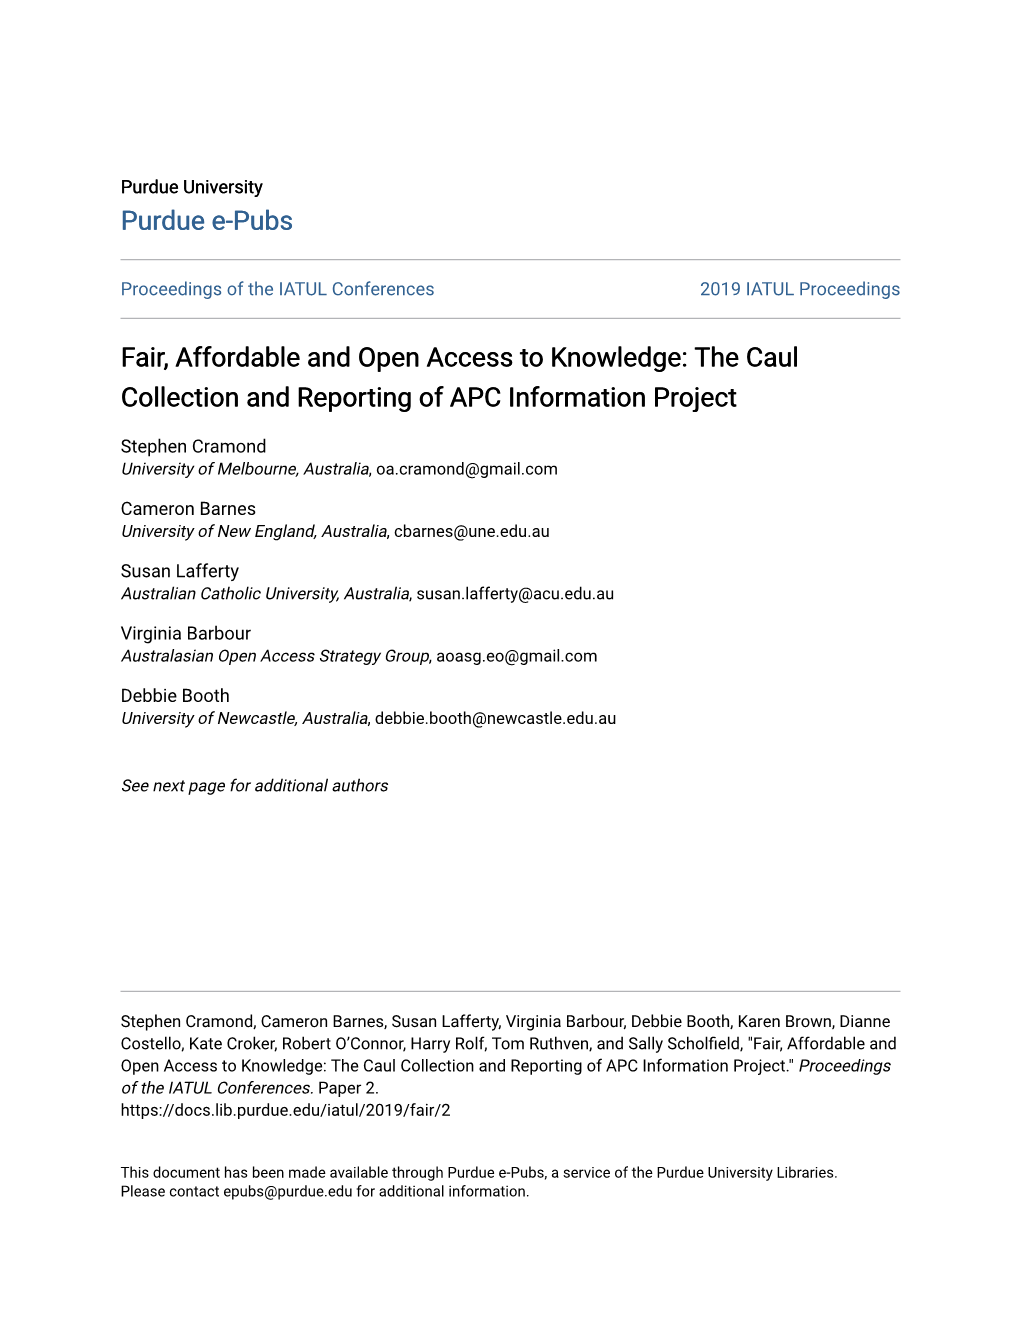 Fair, Affordable and Open Access to Knowledge: the Caul Collection and Reporting of APC Information Project